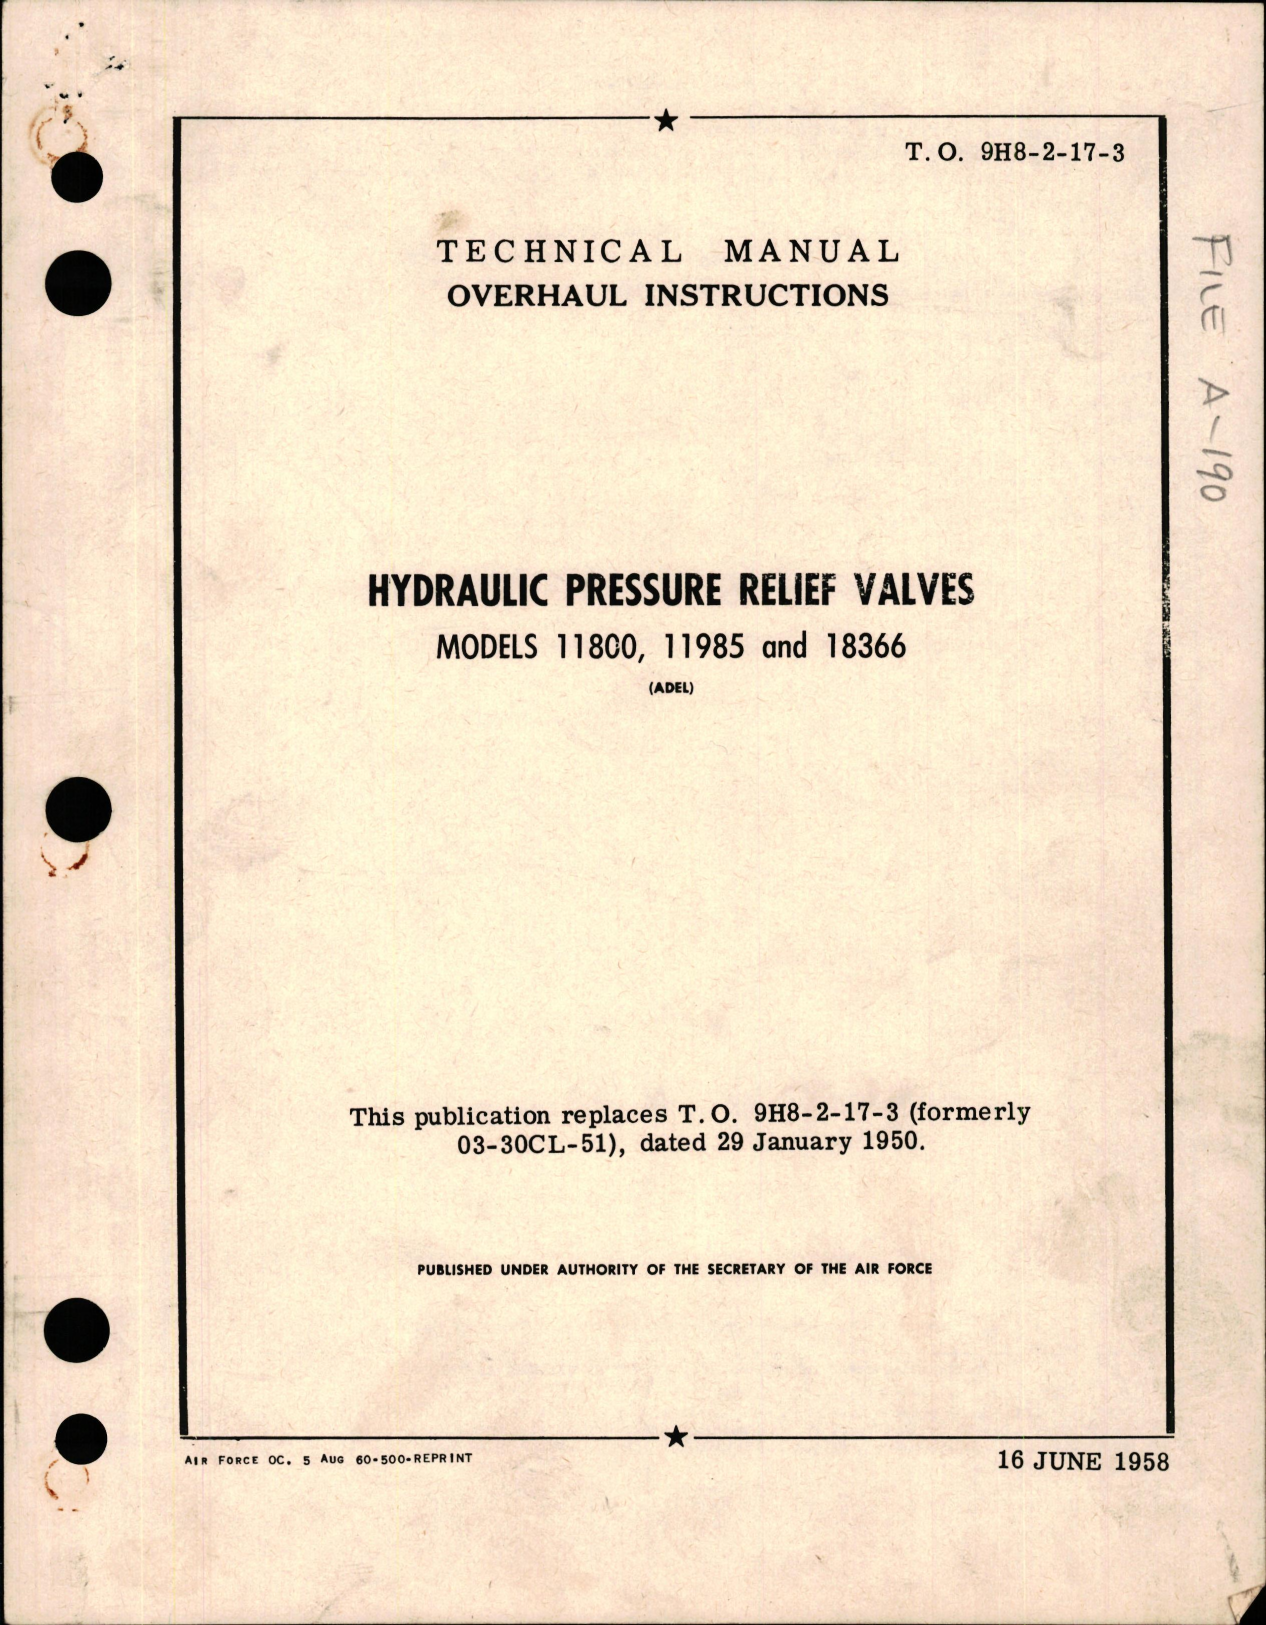 Sample page 1 from AirCorps Library document: Overhaul Instructions for Hydraulic Pressure Relief Valves - Models 11800, 11985, and 18366